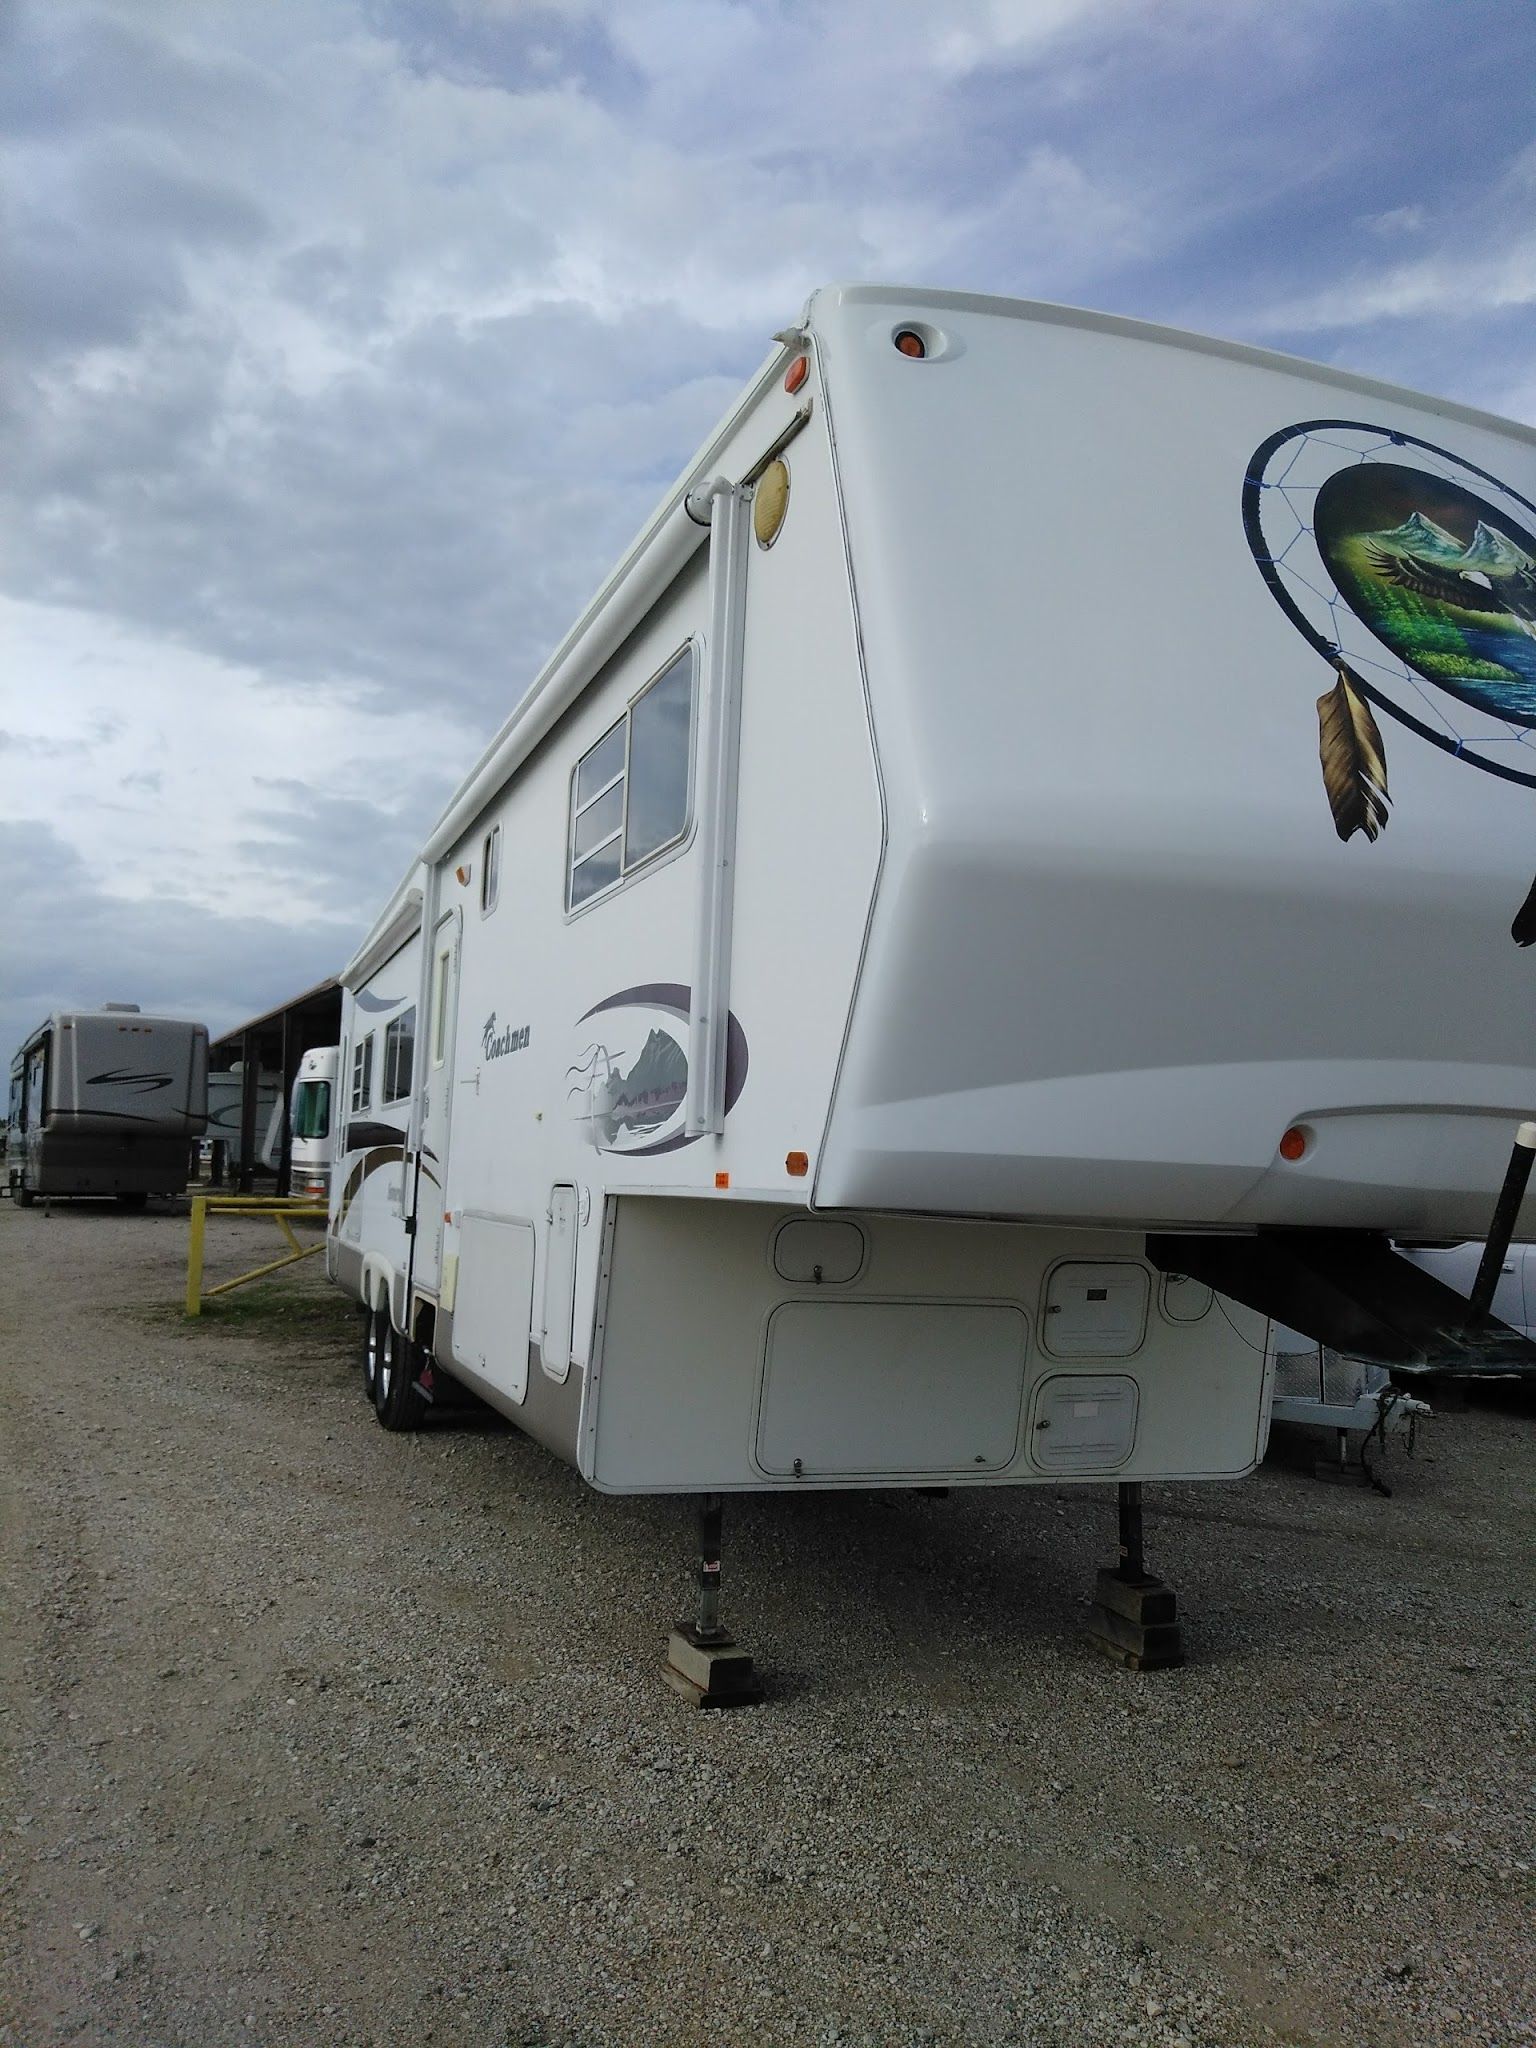 Services & Products Slade's RV Repair in Terrell TX